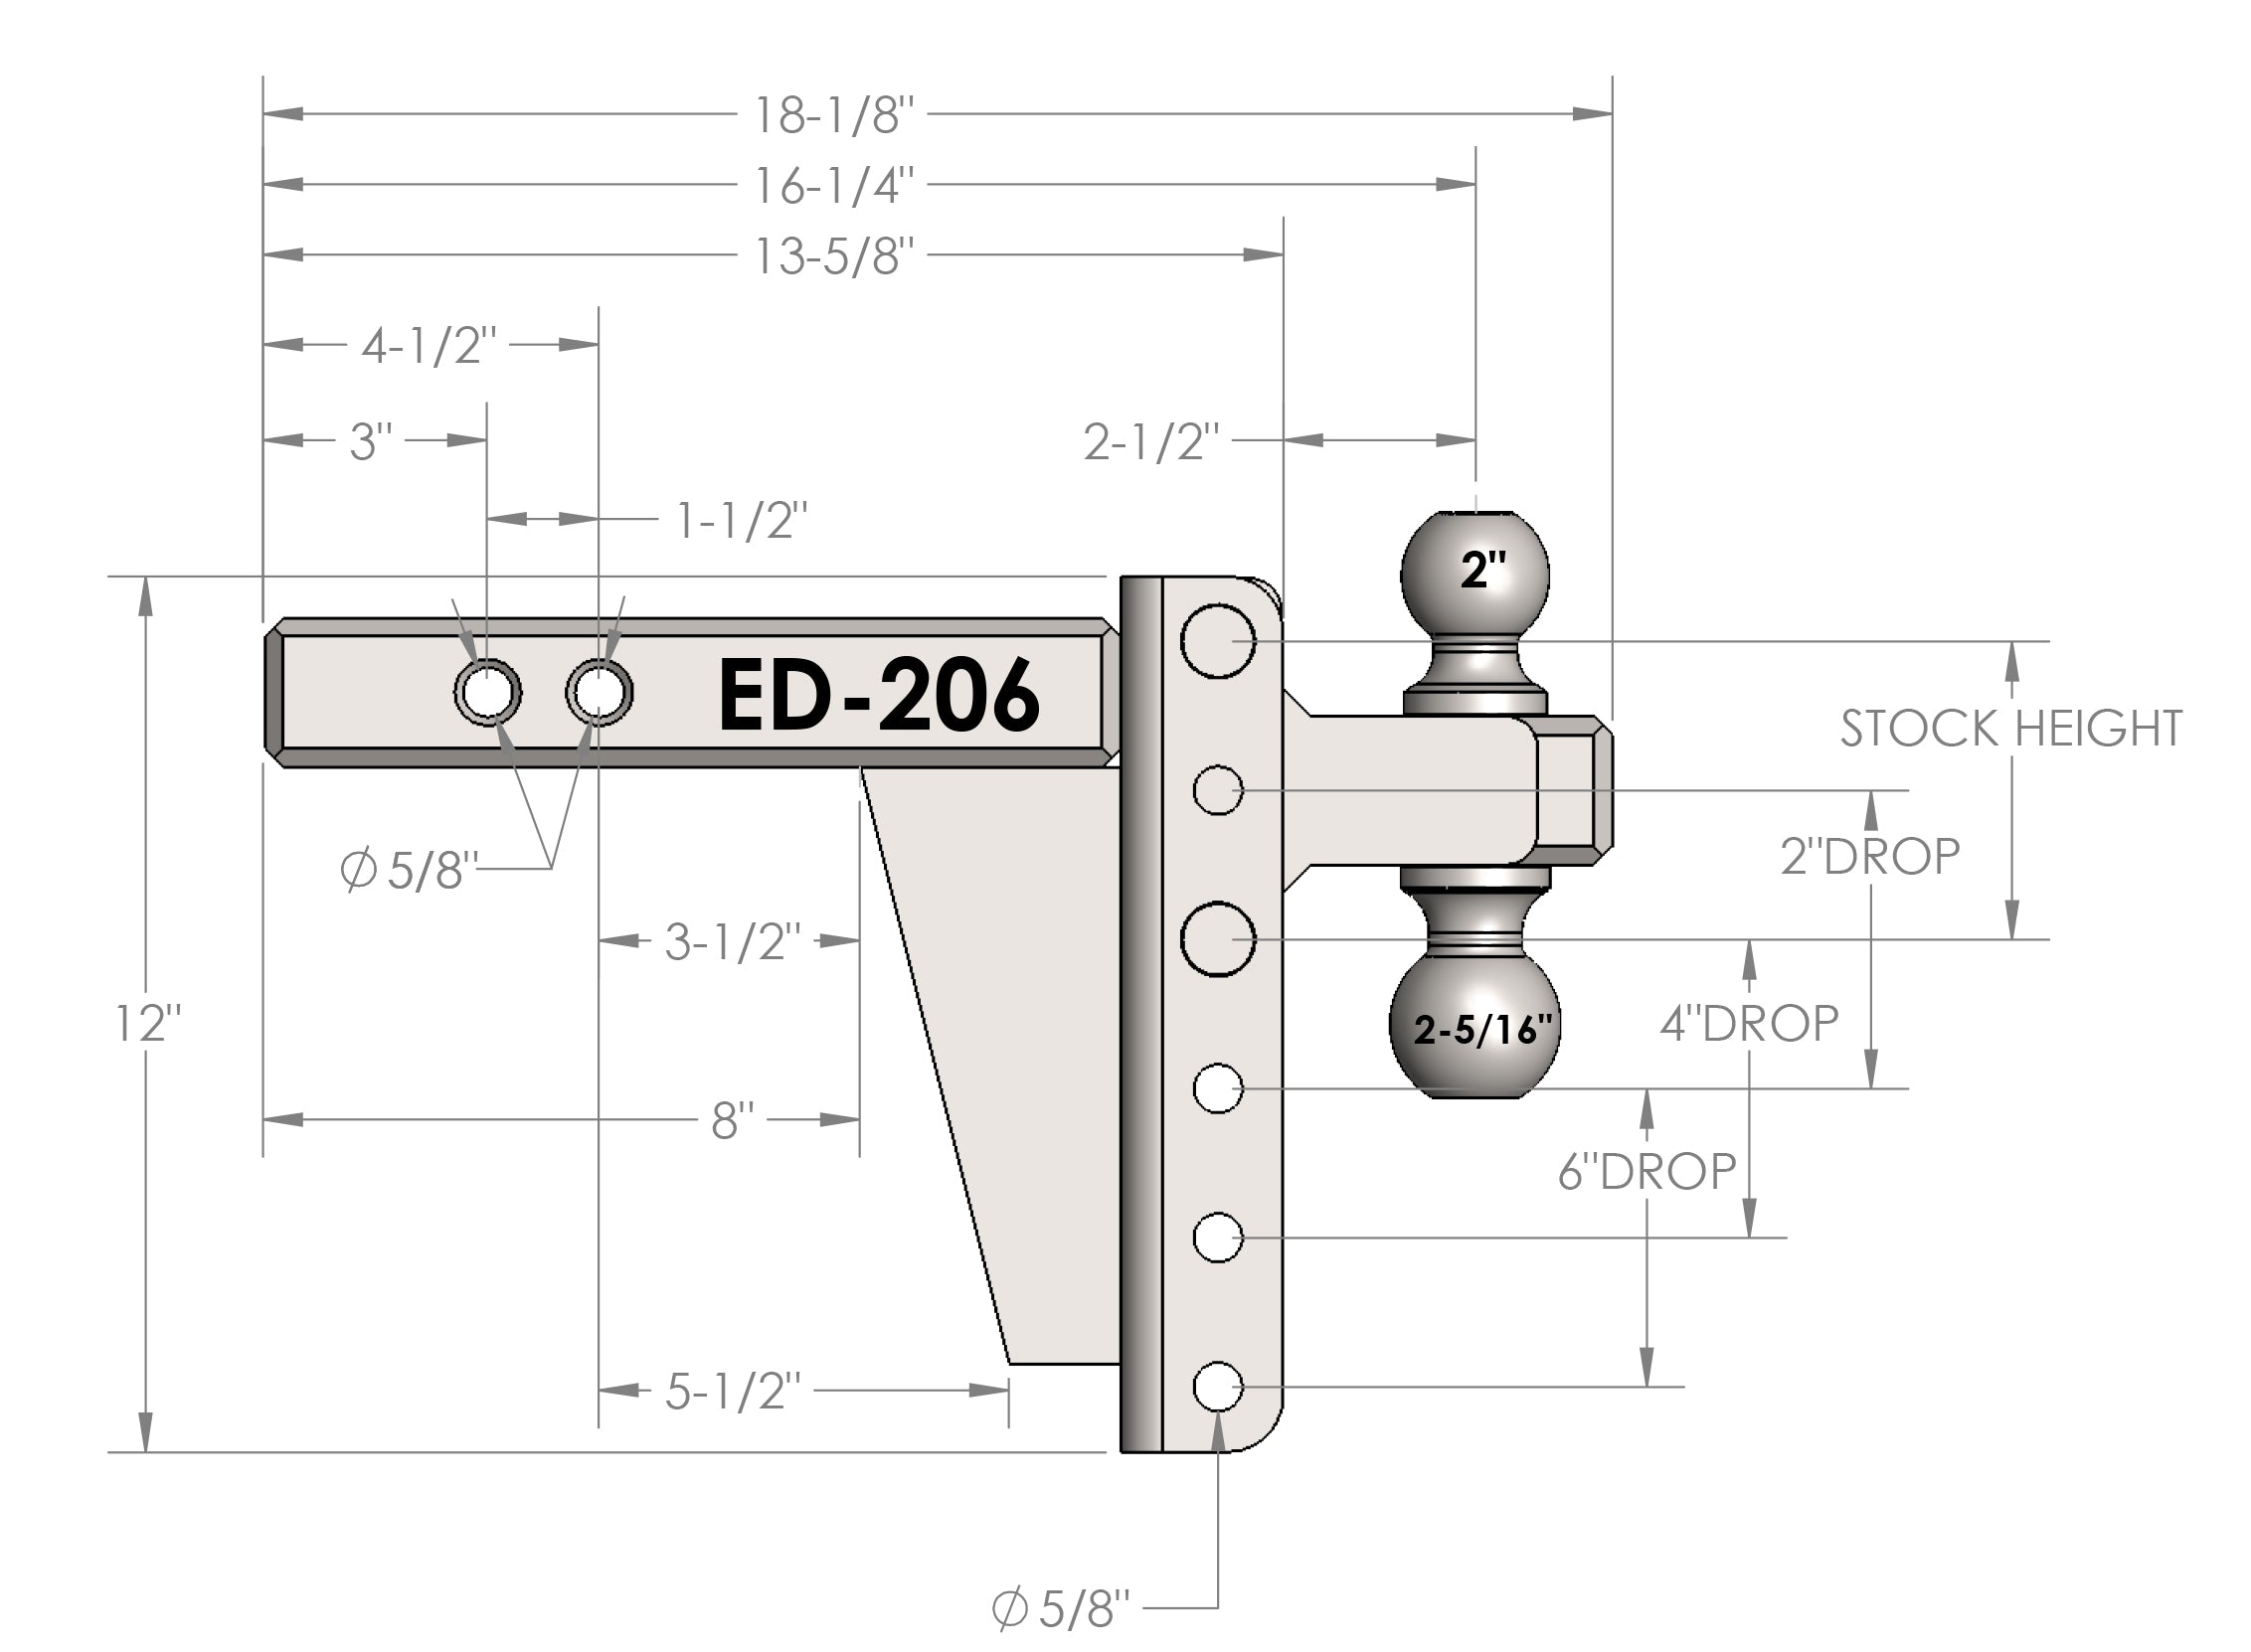 2.0" Extreme Duty 6" Drop/Rise Hitch Design Specification